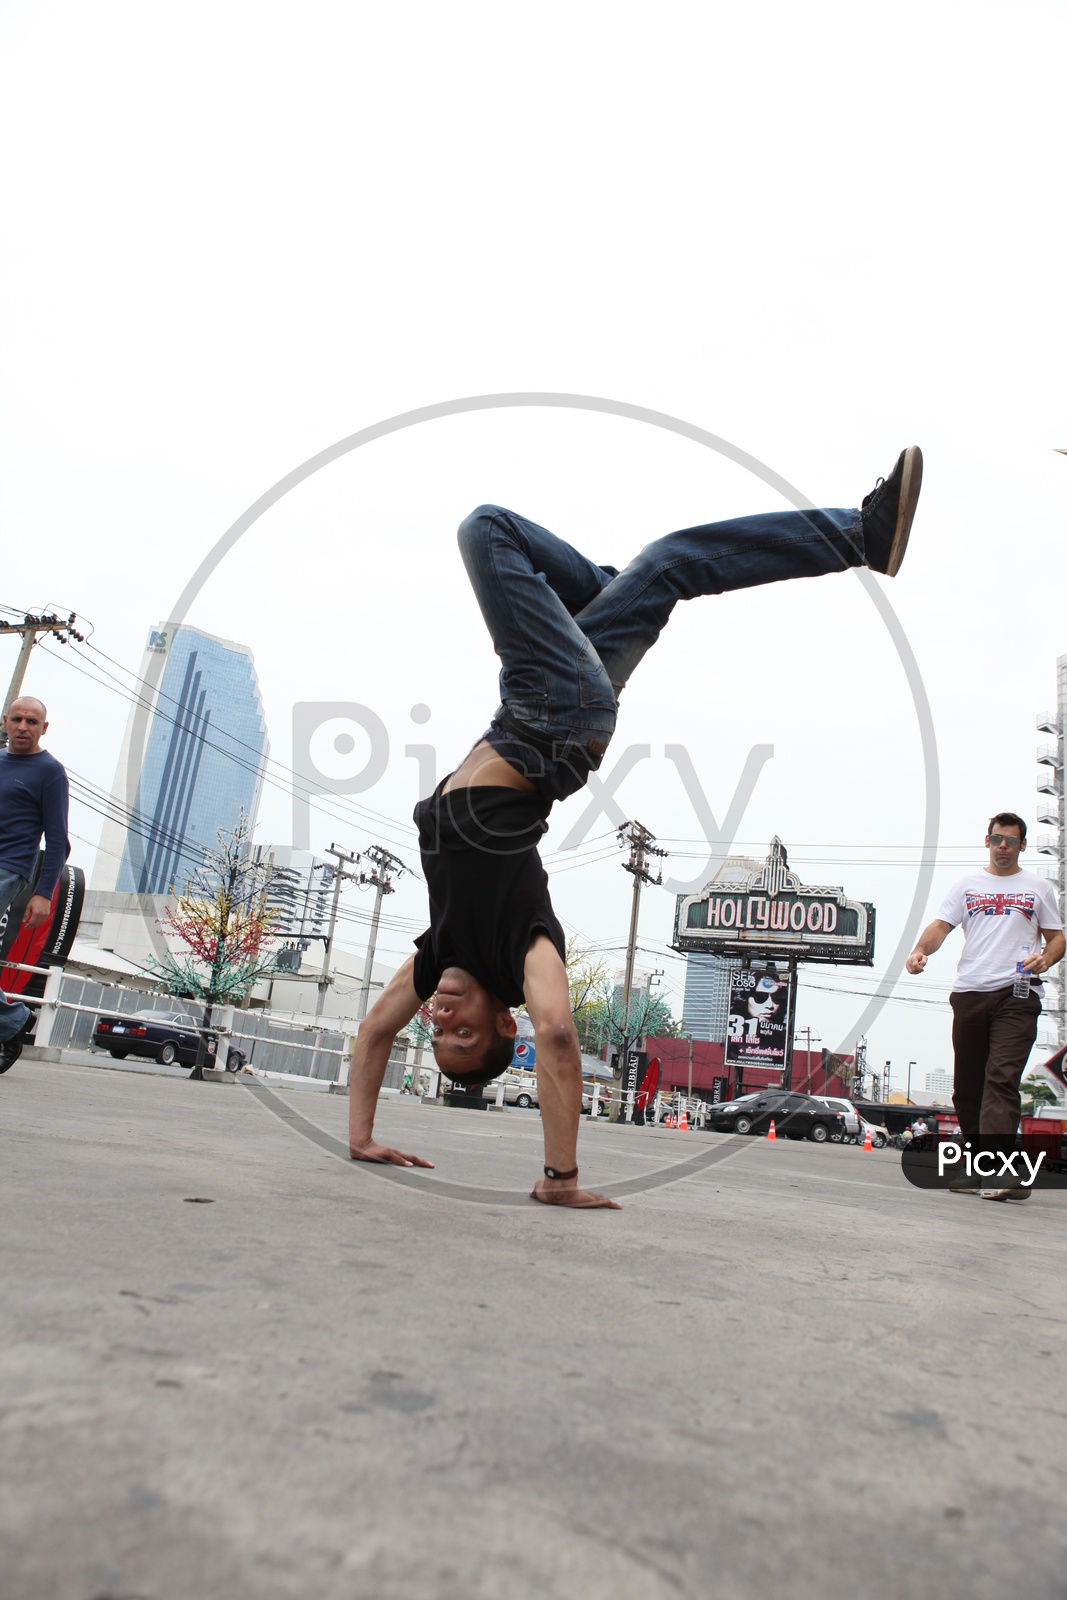 Foreign Fighters  doing Stunts  in a Action Sequence In Indian  Movie Shooting